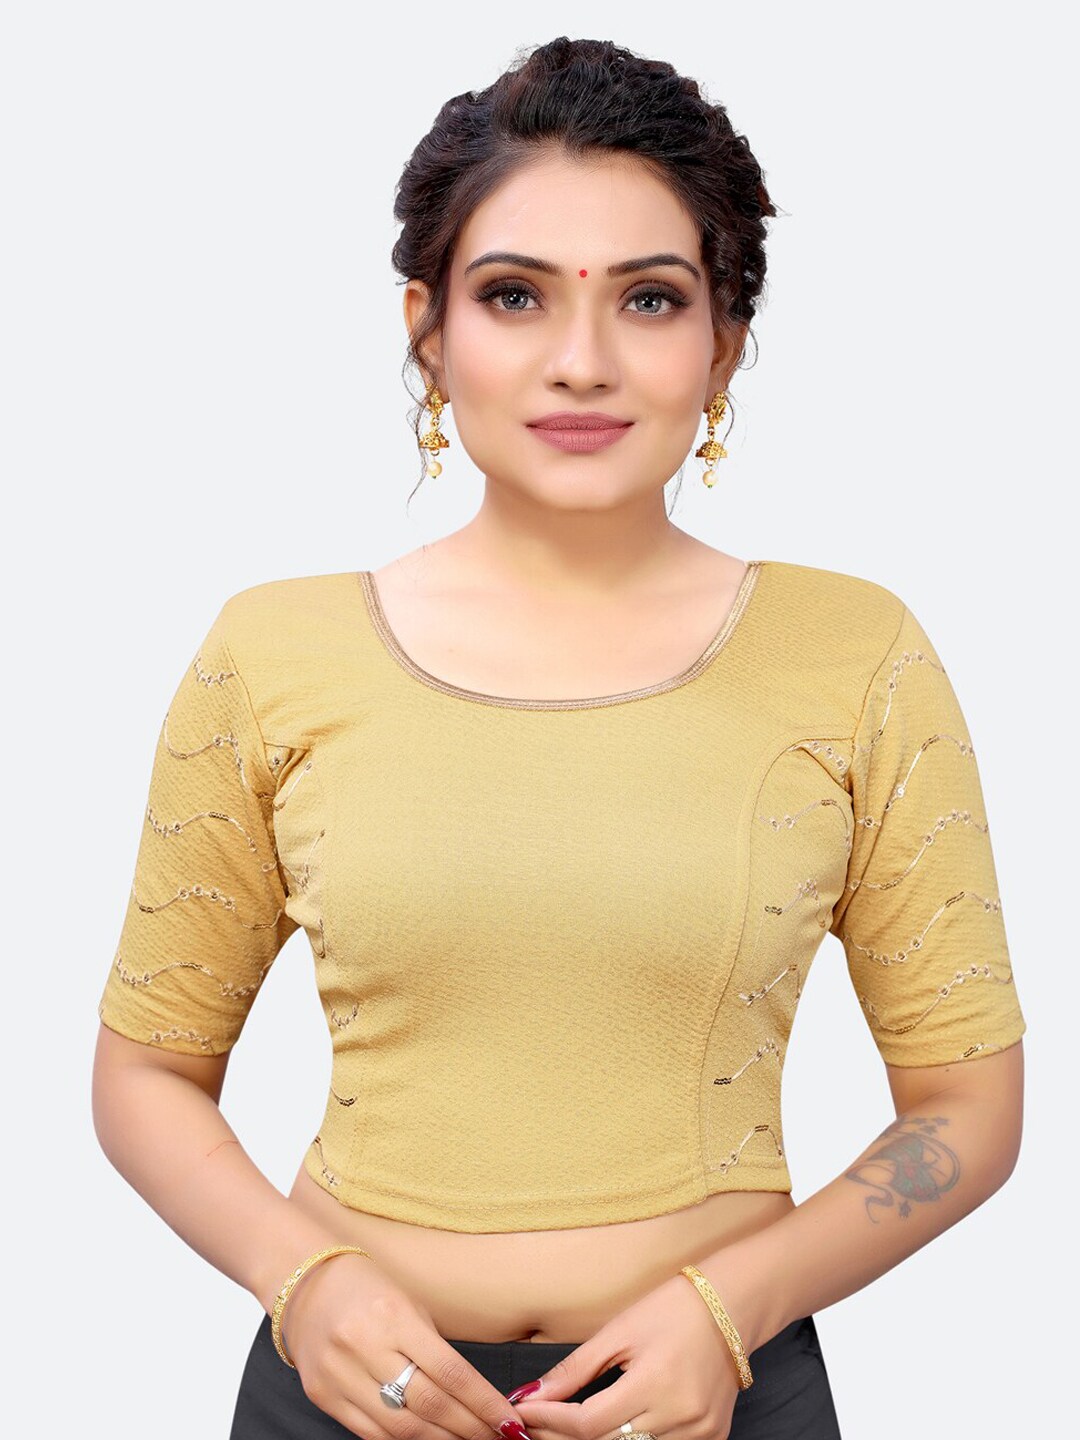 SIRIL Cream-Coloured Embellished Saree Blouse Price in India